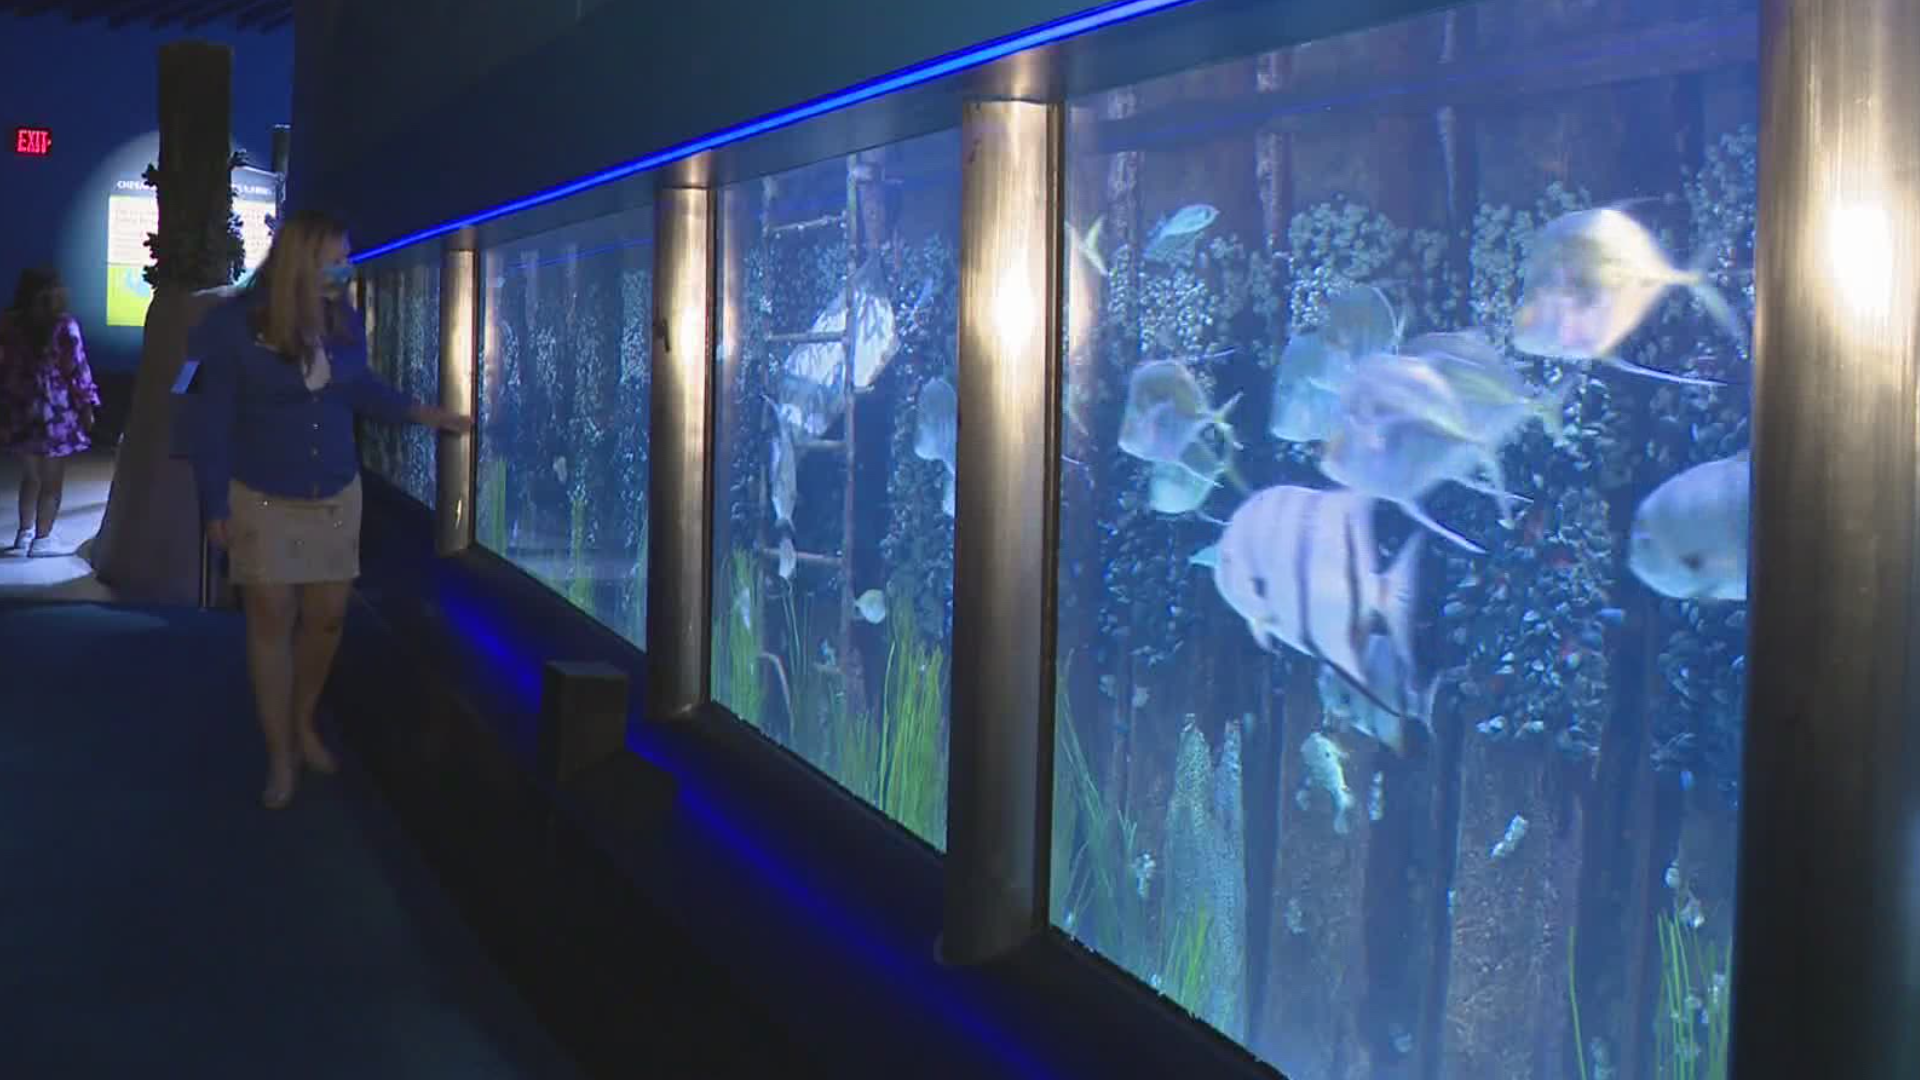 The aquarium said it would reopen June 19. Like other places, it closed because of the pandemic. There are some changes to help people enjoy a safe, healthy visit.